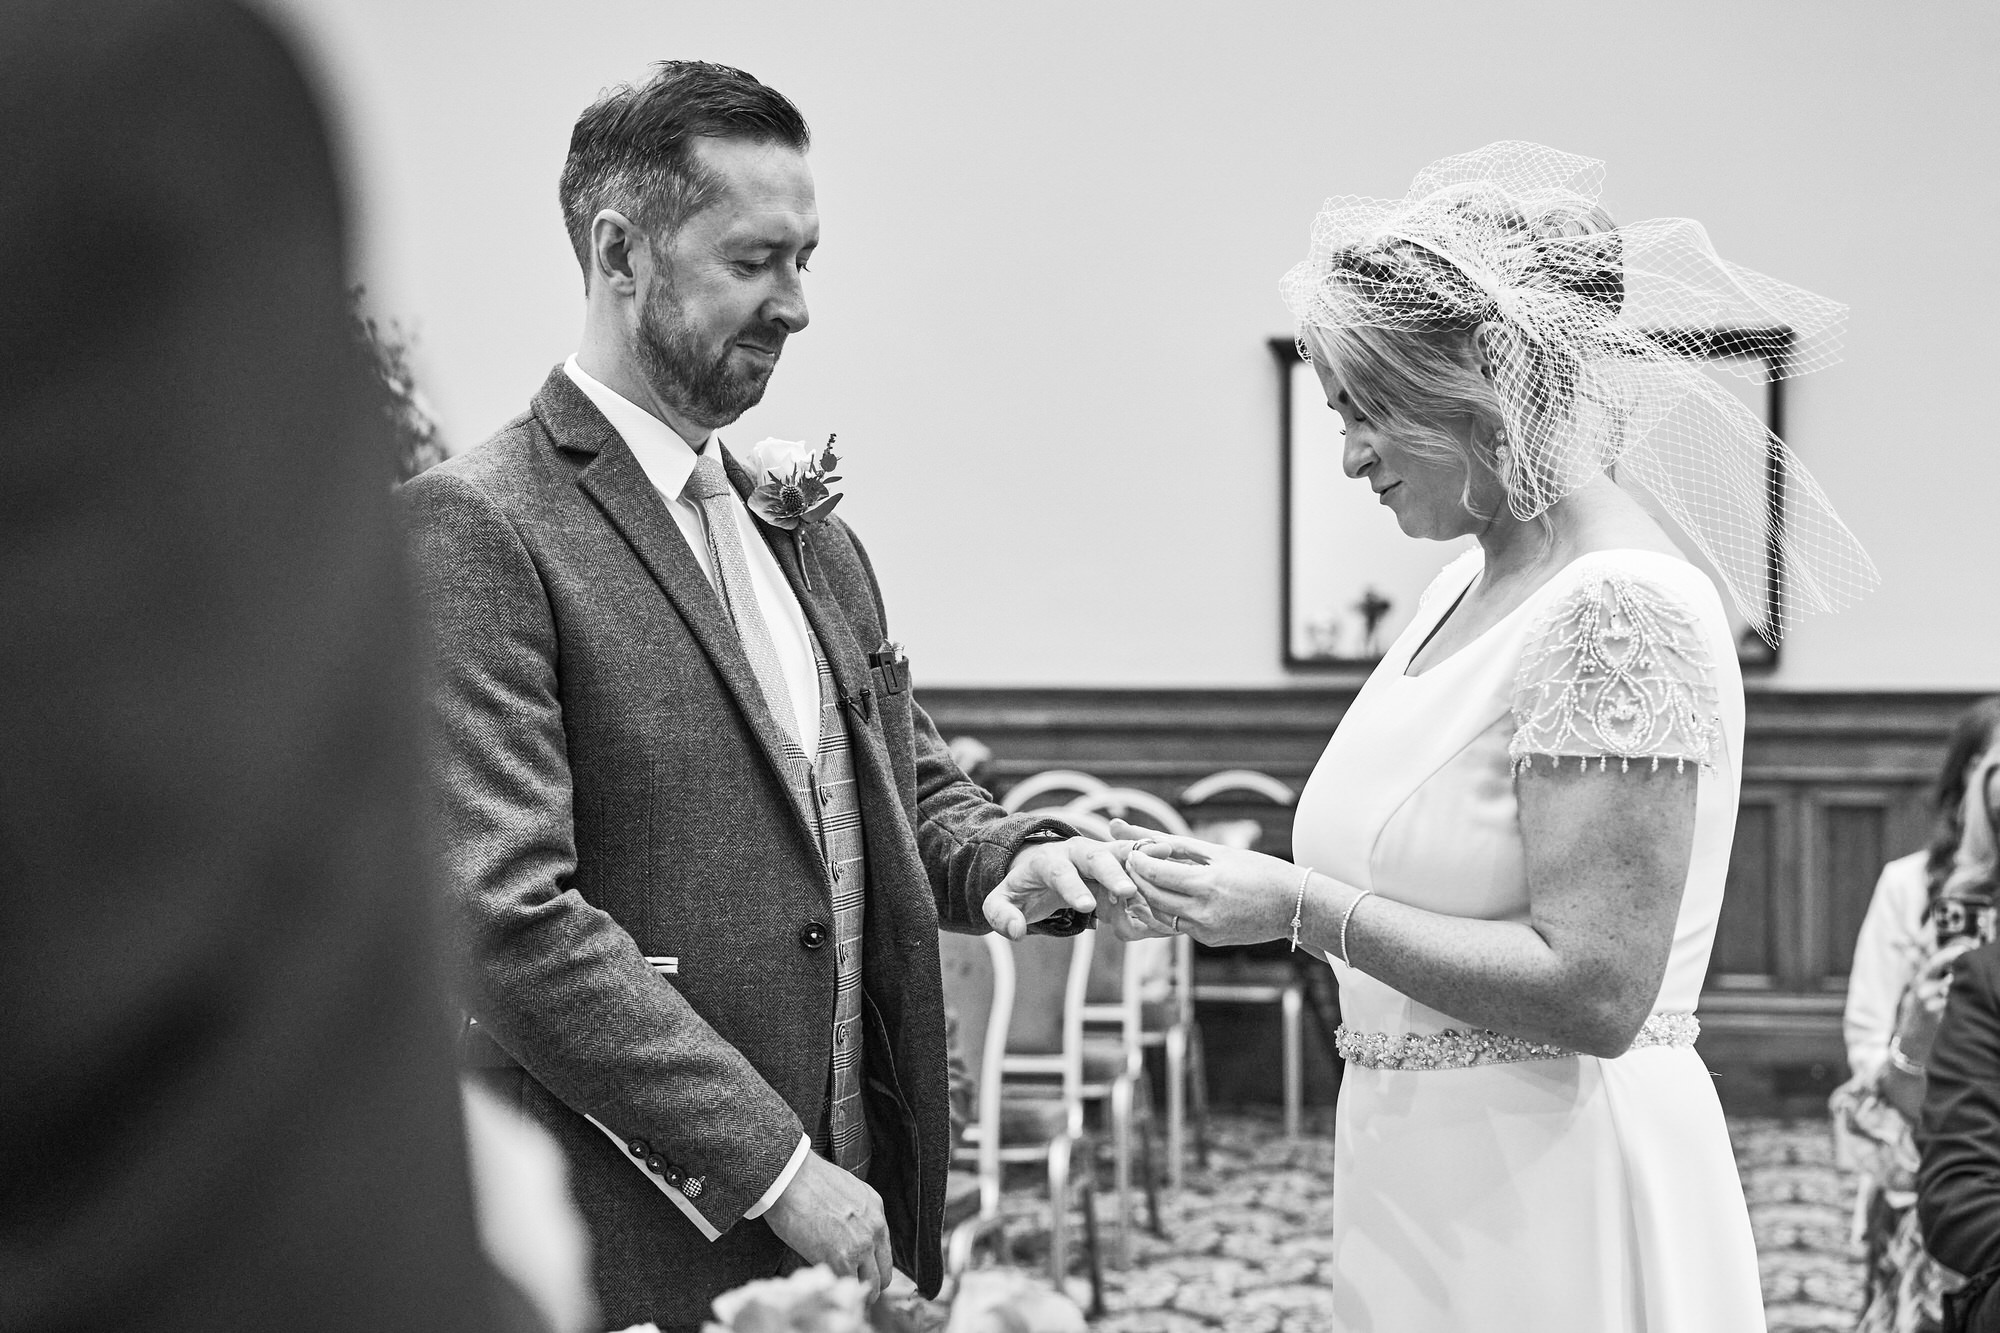 a black and white photo of the bride placing a wedding ring on the groom